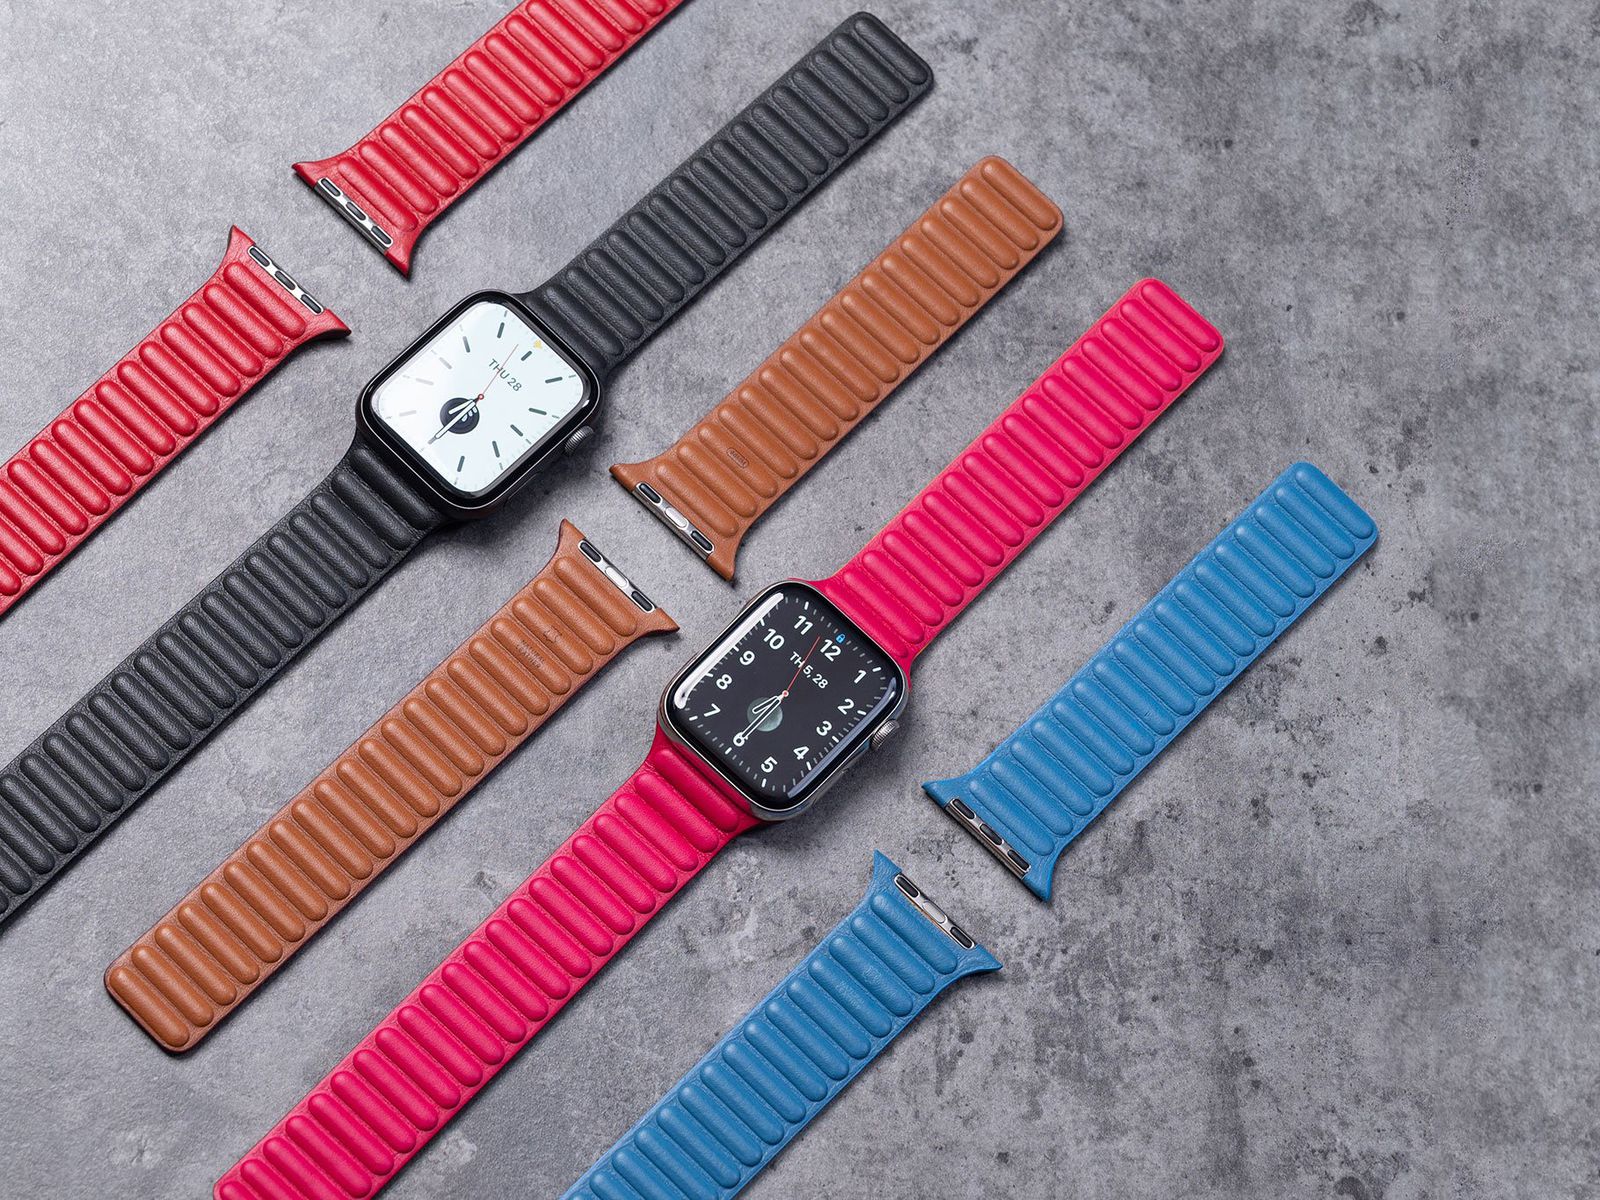 Apple's Leather Loop Watch Band Surface